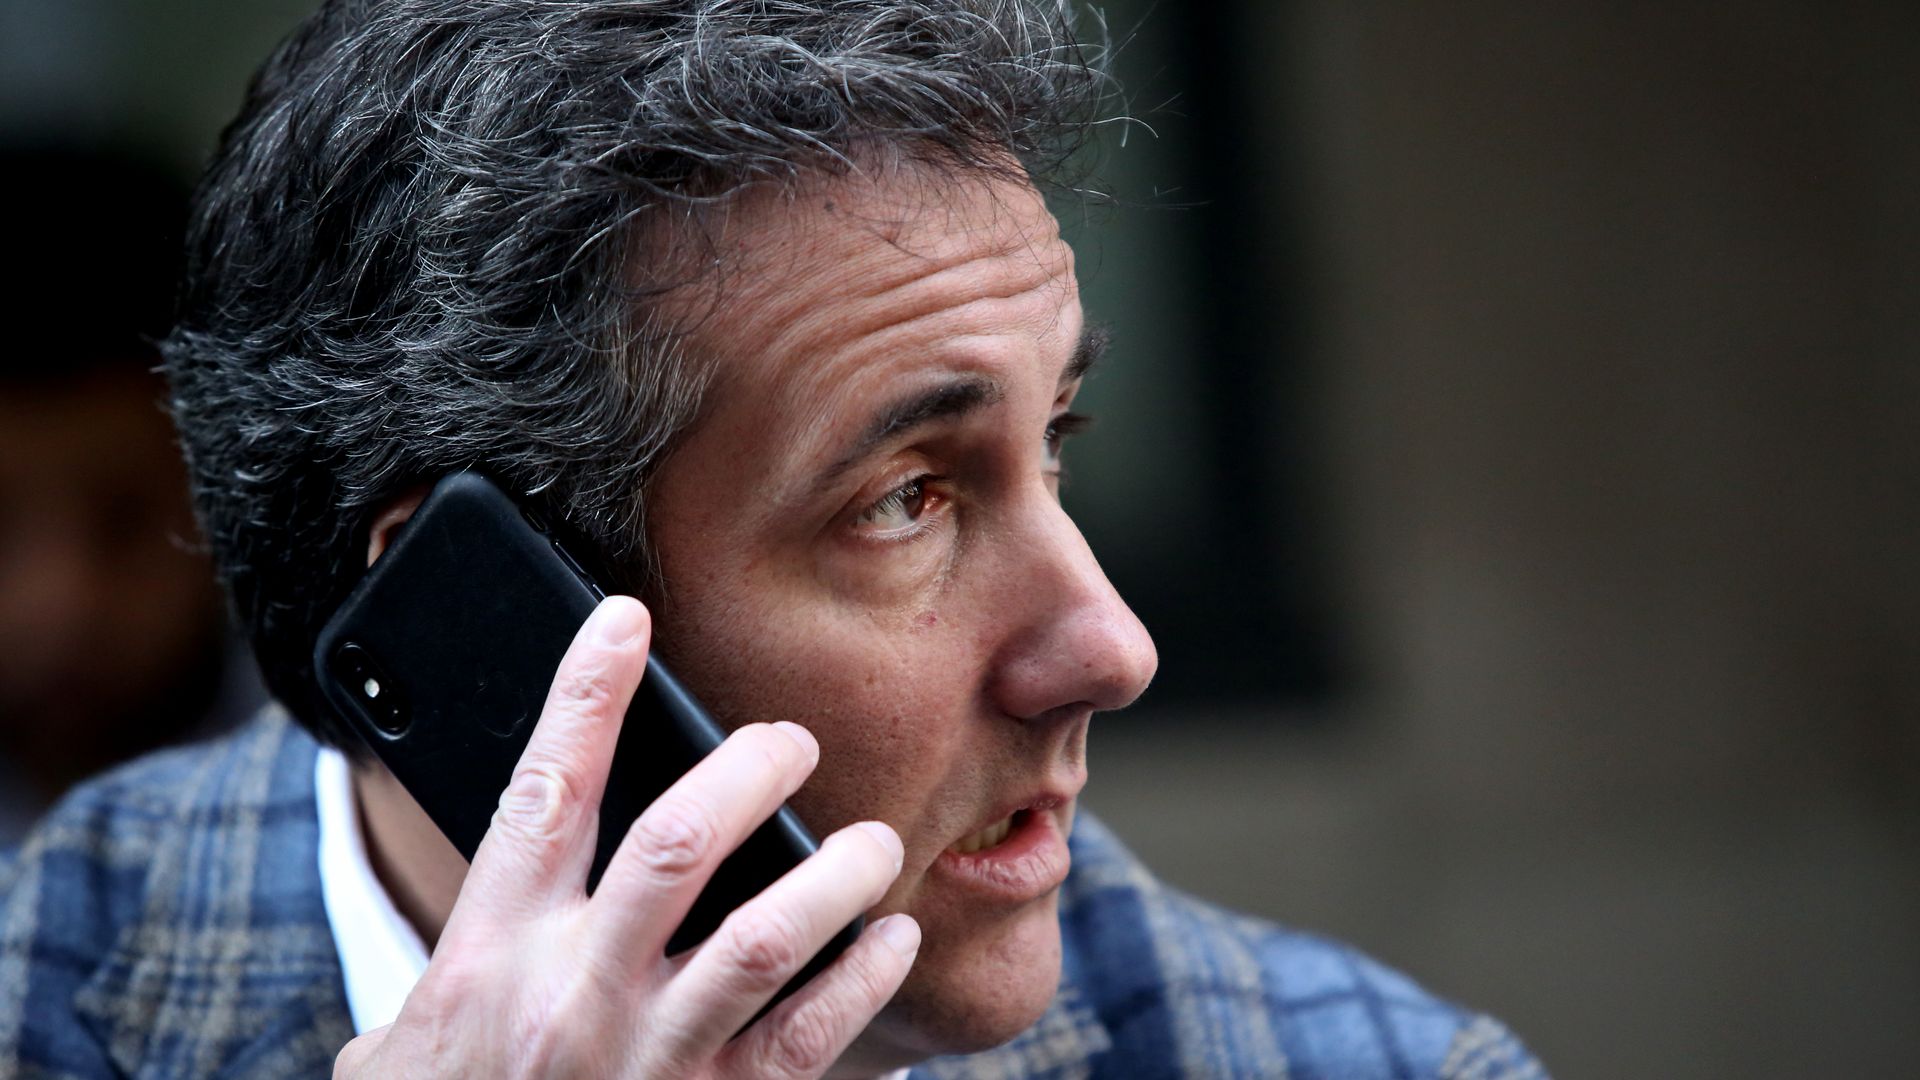 Michael Cohen holds a phone to his ear